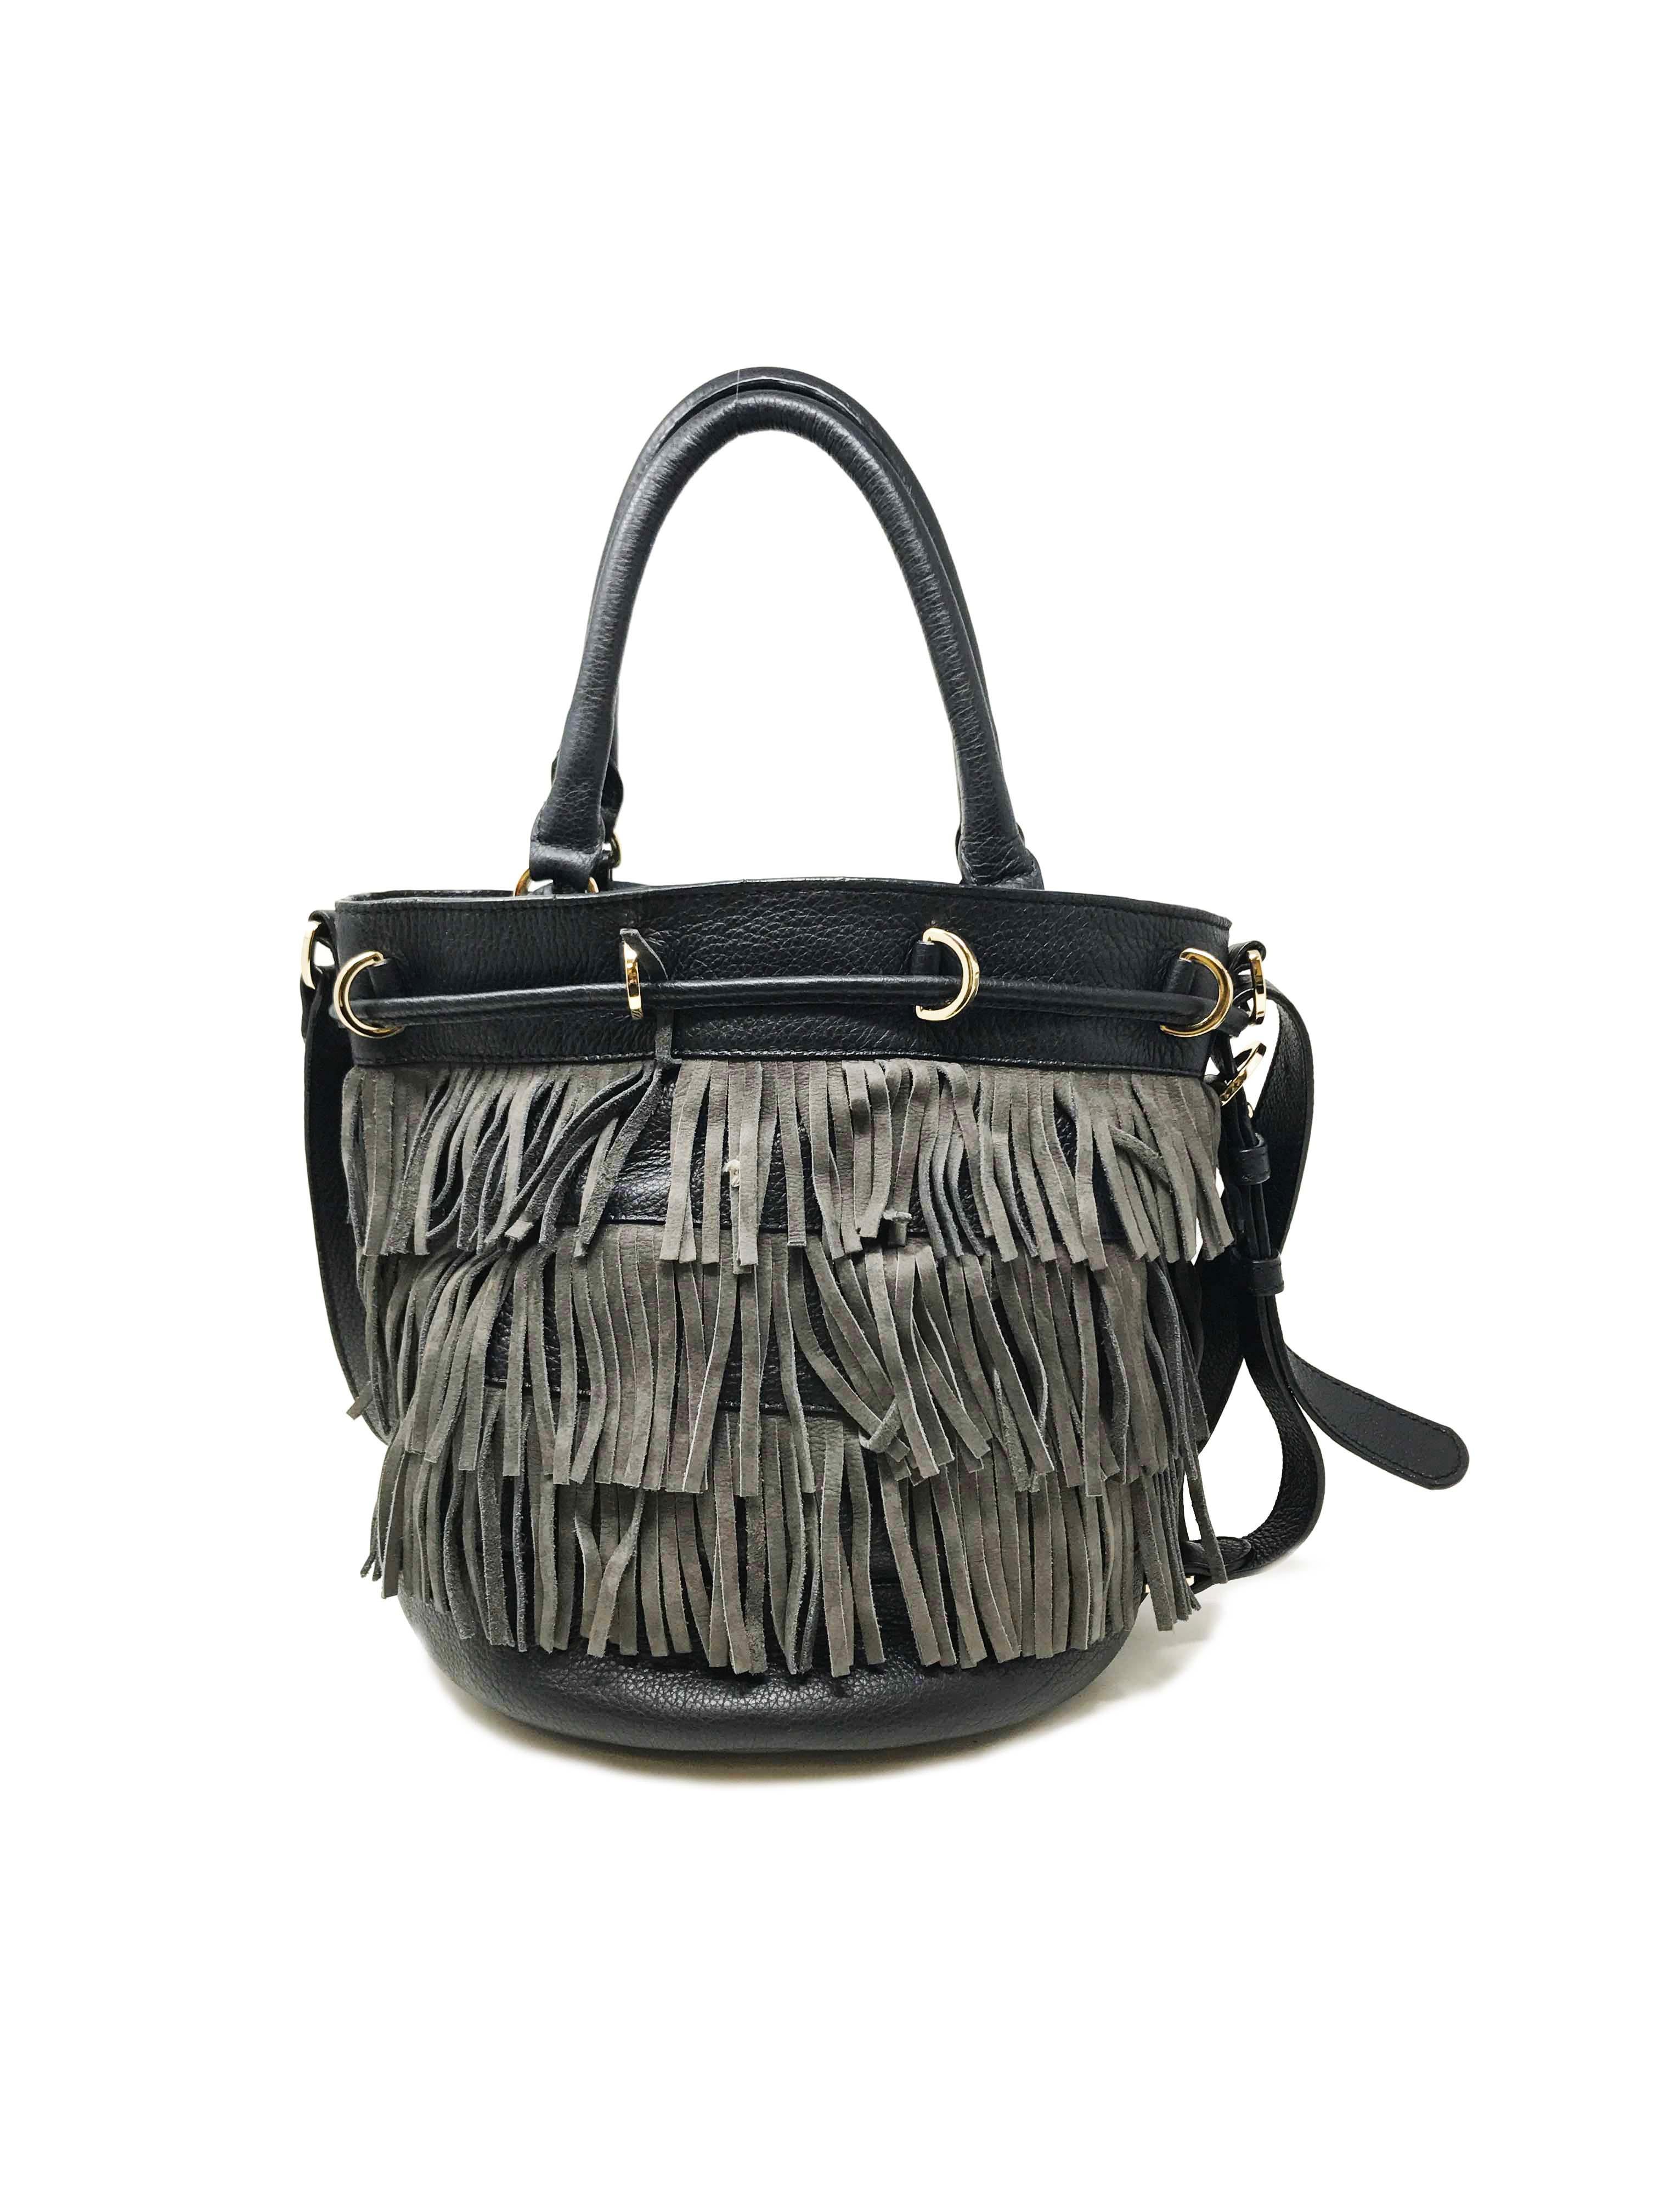  This is brand new without tags See by Chloe Black Leather Women's Shoulder Bag. Dust-bag is Included.
Dimensions: L13*H11*D8.5